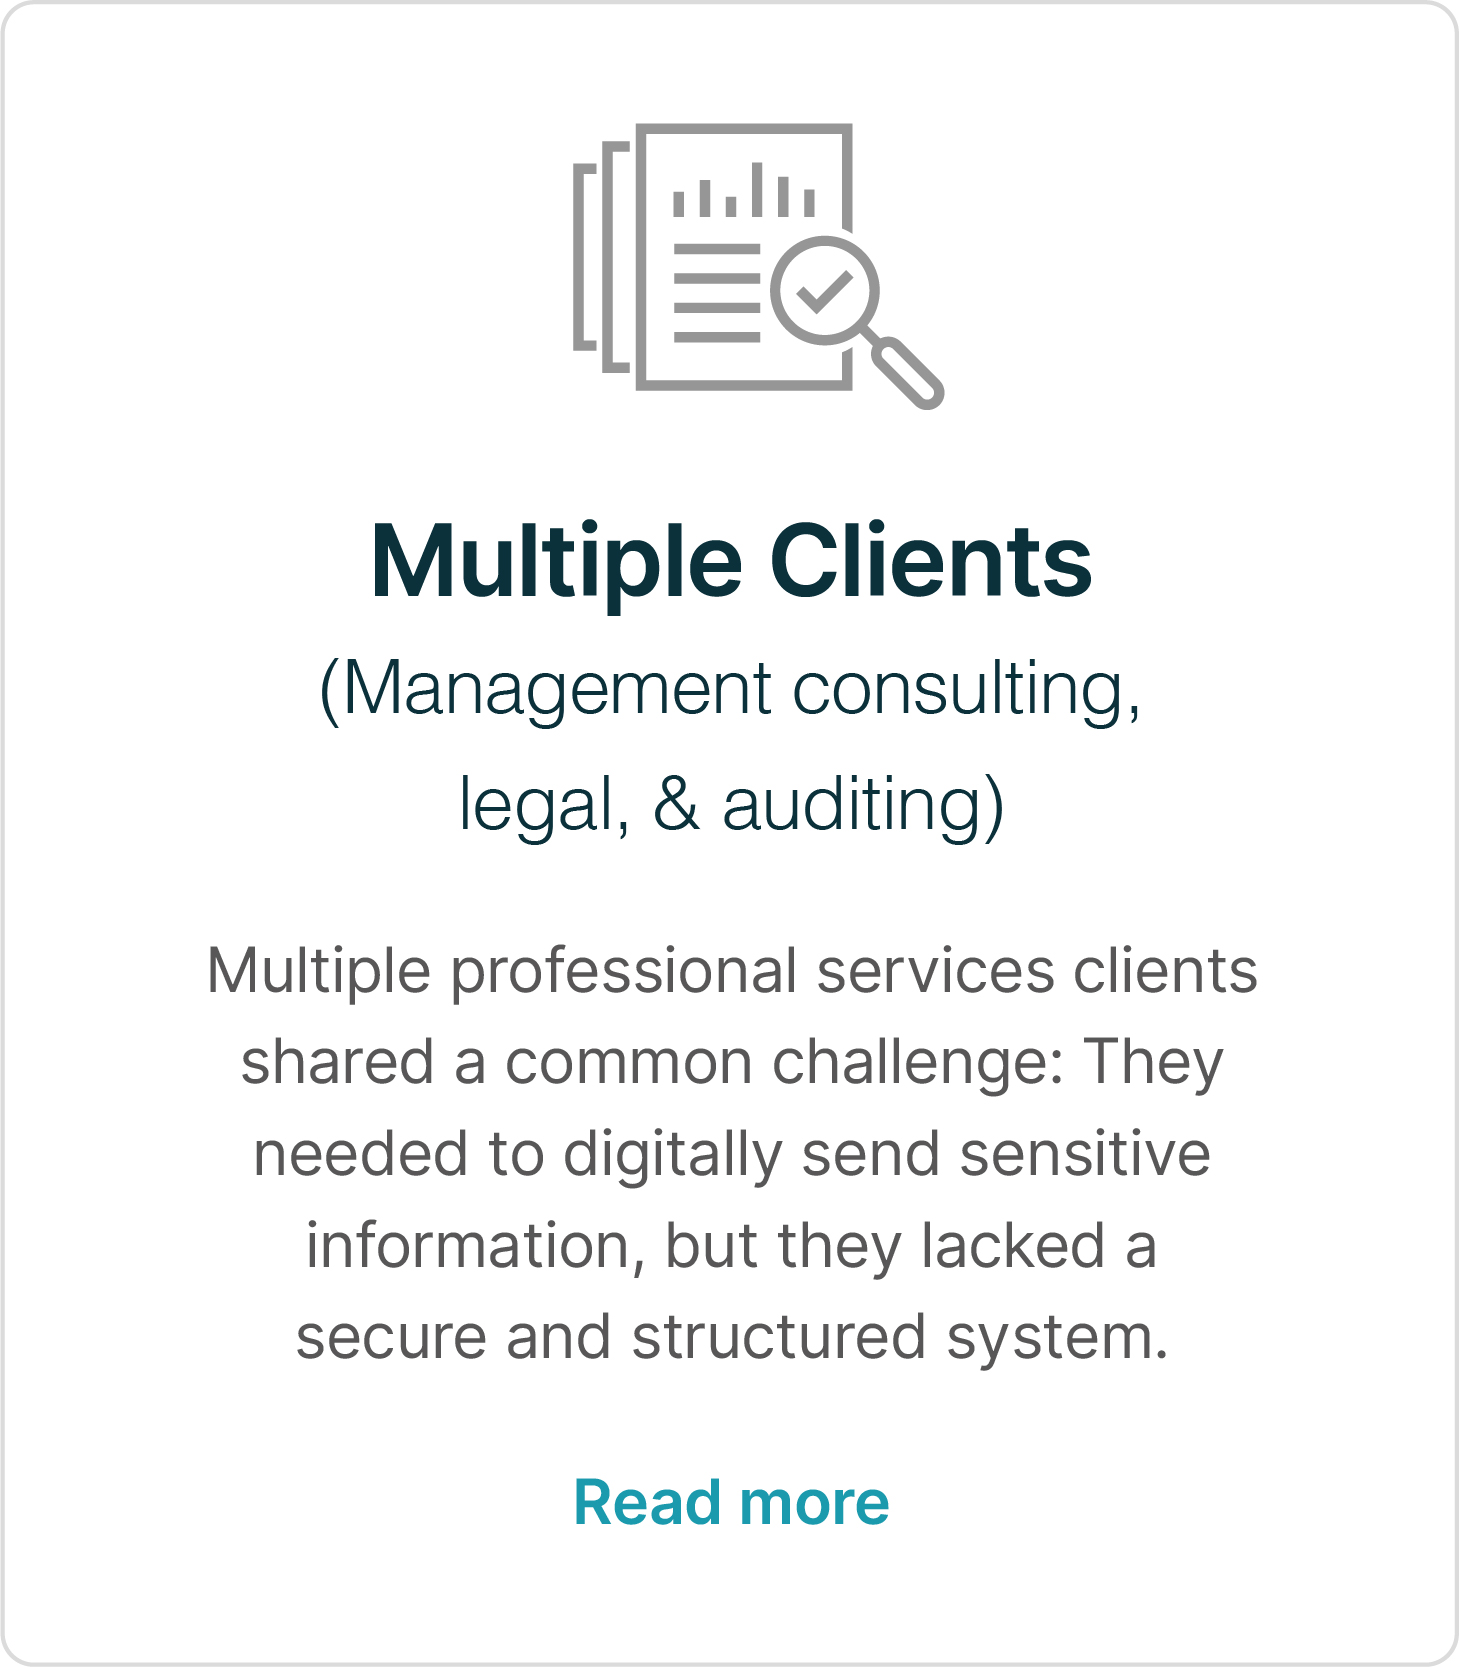 Multiple-Clients-ManagementConsulting-Legal-Auditing